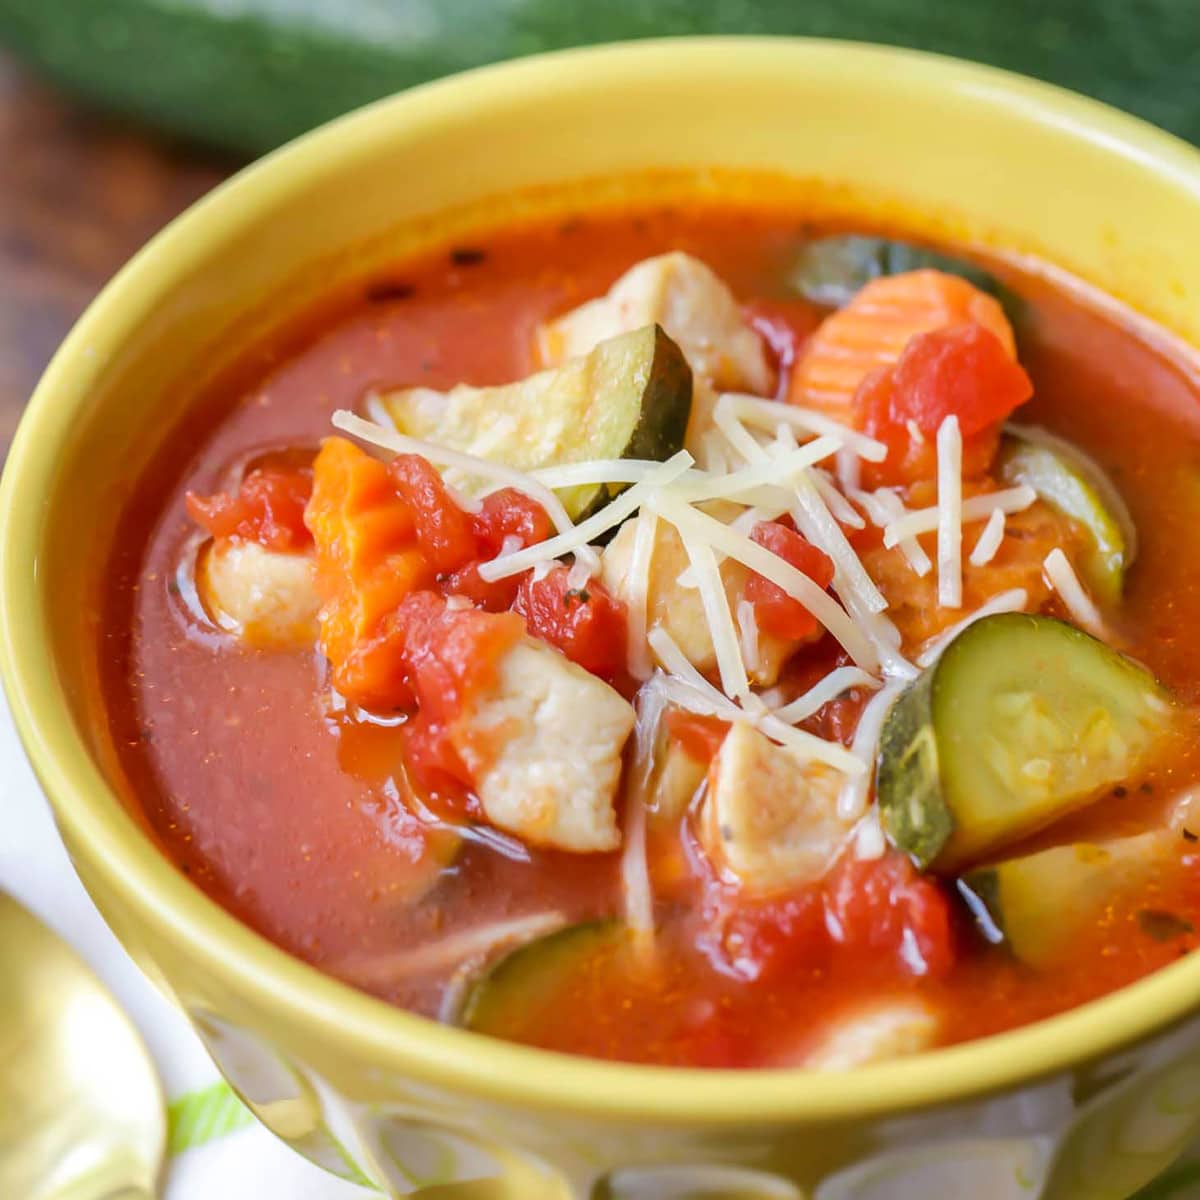 Easy soup recipes - Italian chicken vegetable soup served in a yellow bowl.